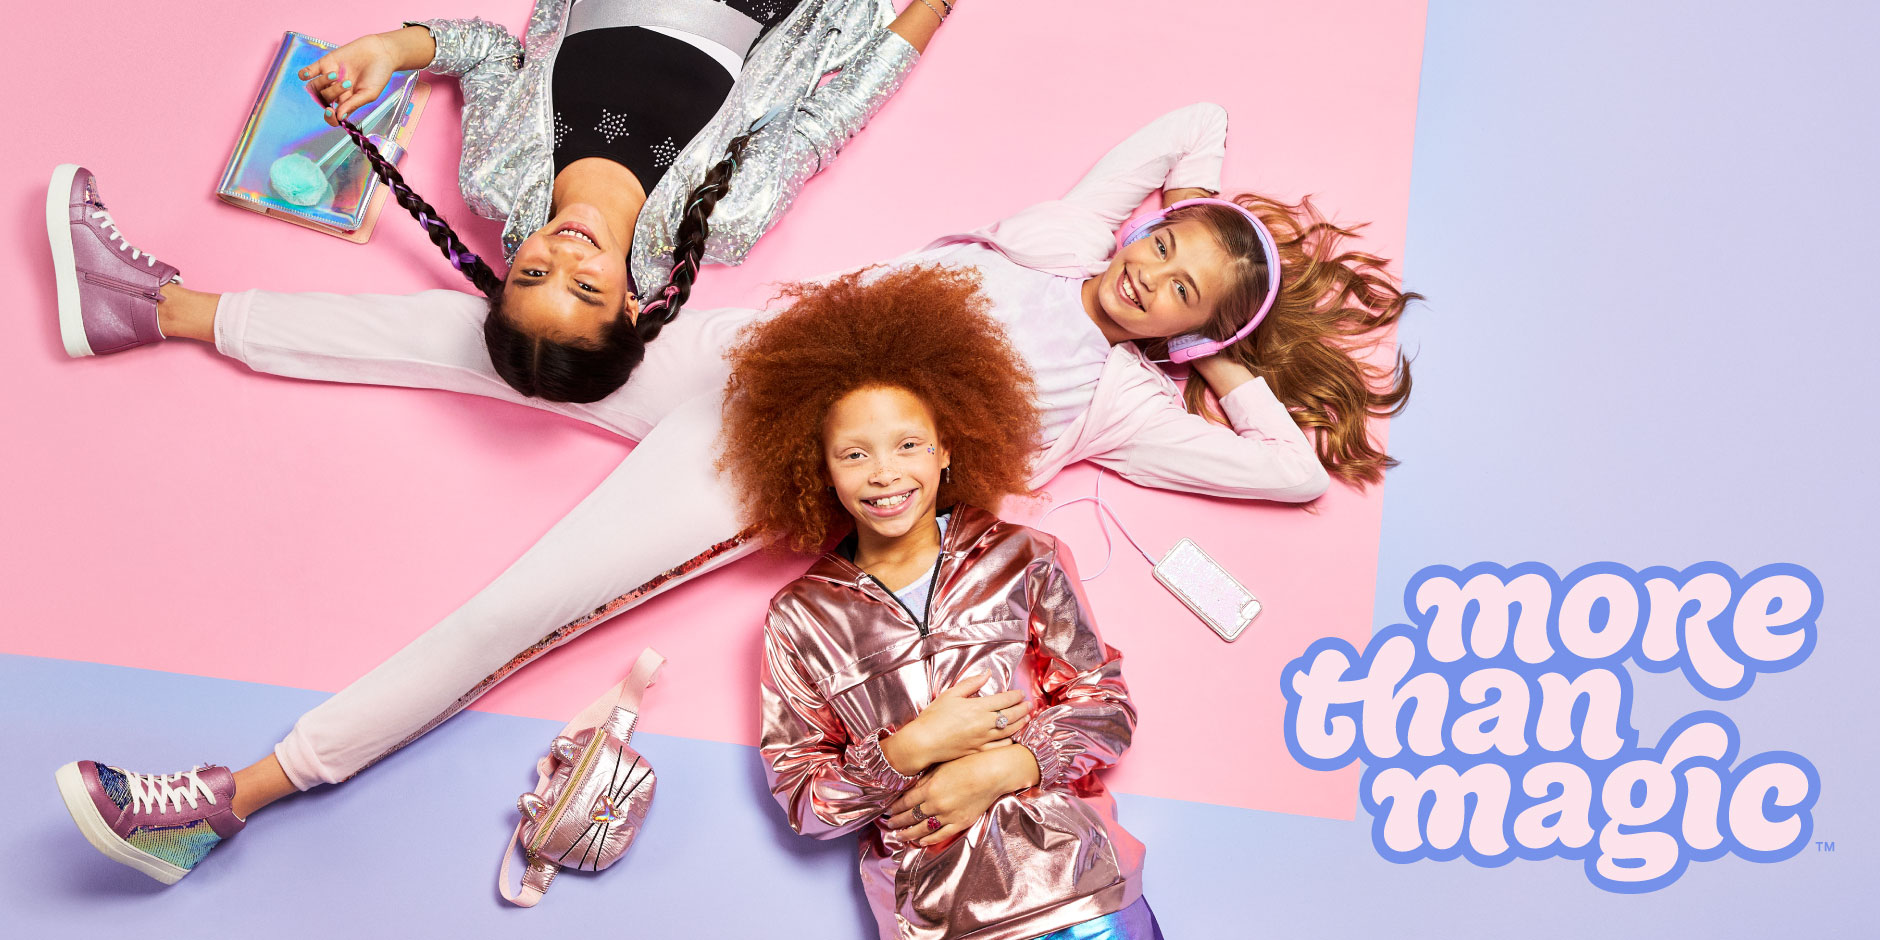 Ta-da! We're Unveiling Our First Tween-Focused Lifestyle Brand